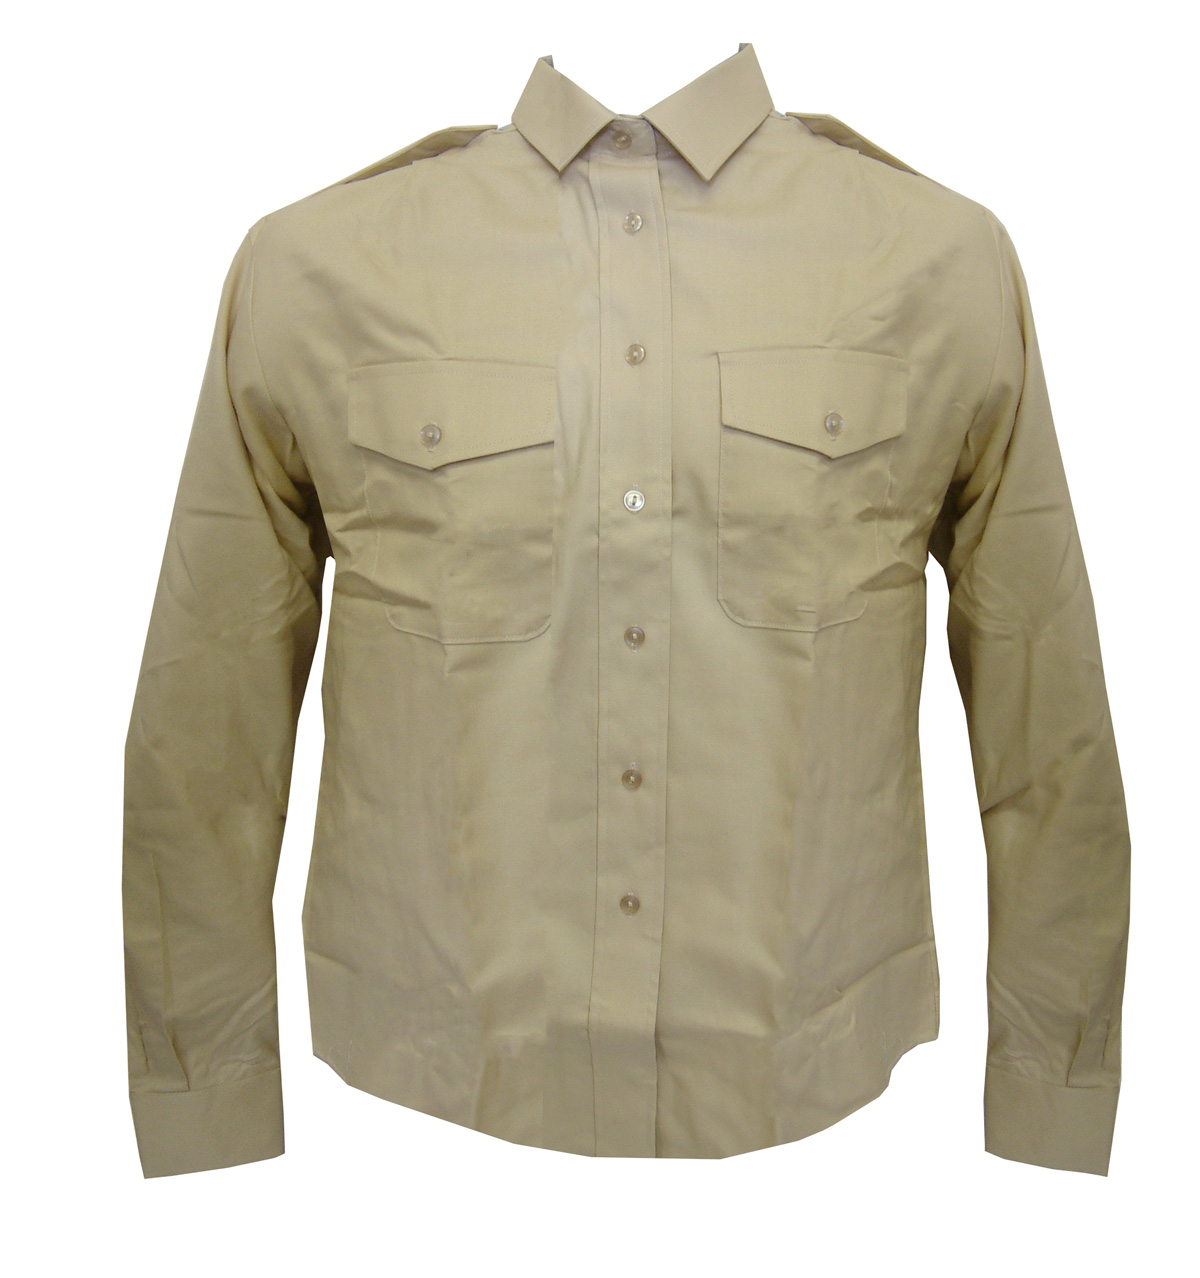 New Womens Long Sleeve Fawn Shirt (No.2 FAD) by British Army